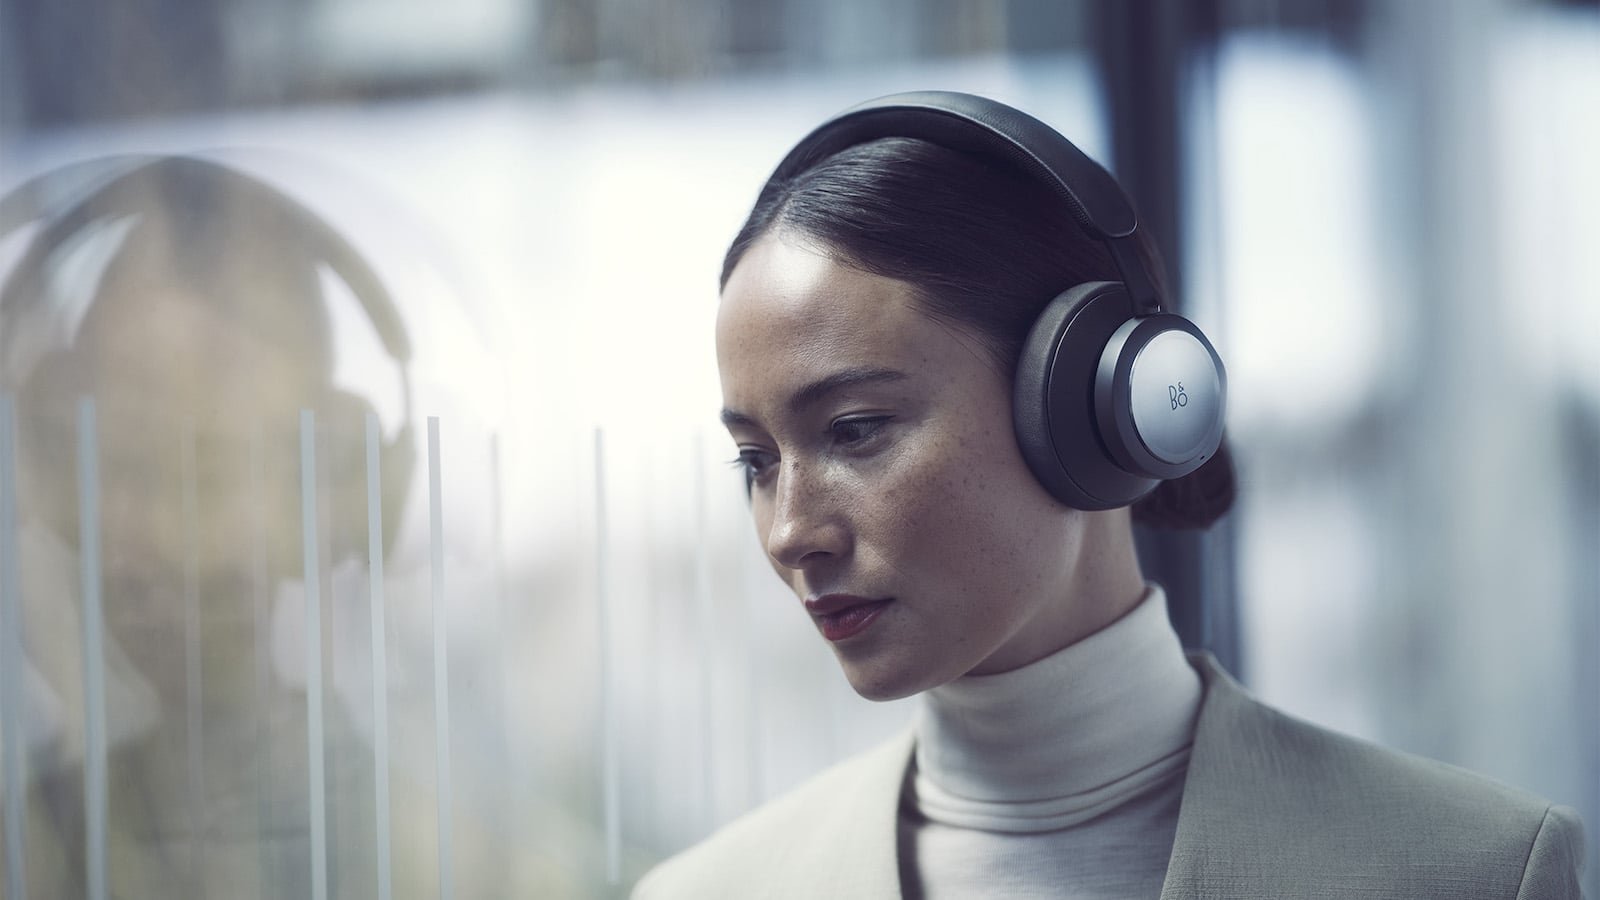 Beoplay Portal Elite gaming headset works with Xbox, PlayStation, PC, and mobile games